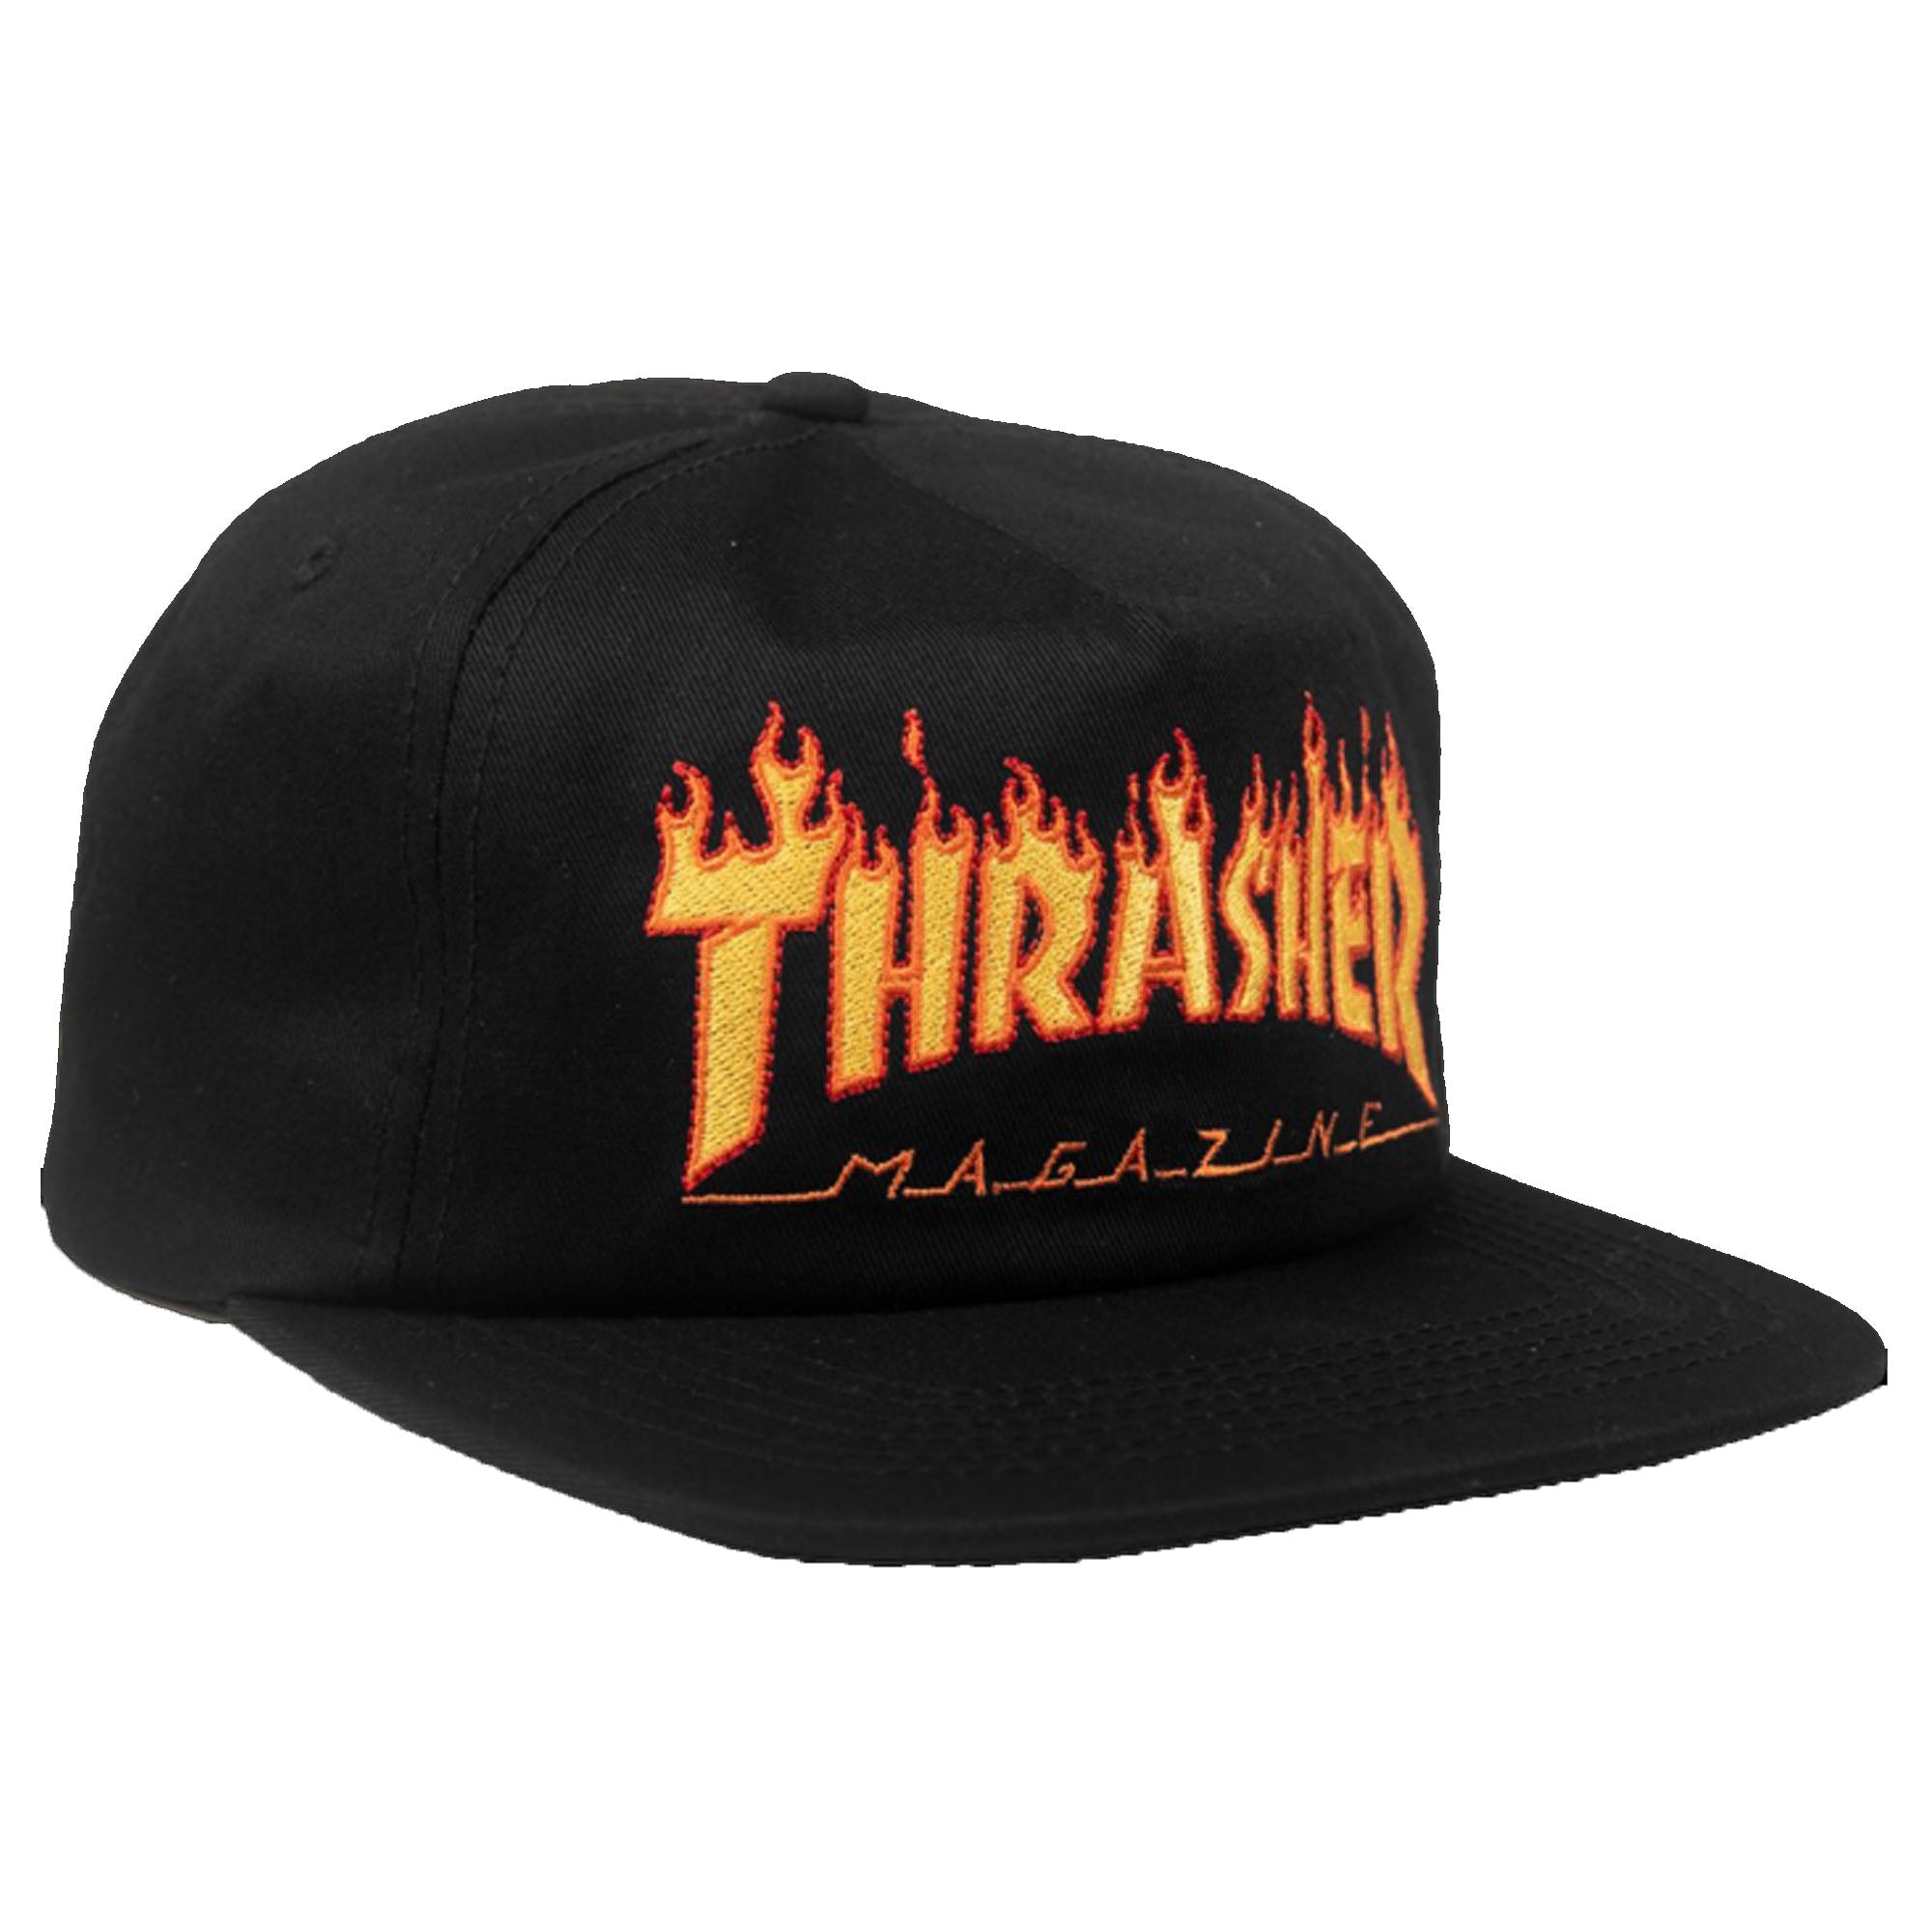 Thrasher Magazine Flame Embroidered Men's Hat